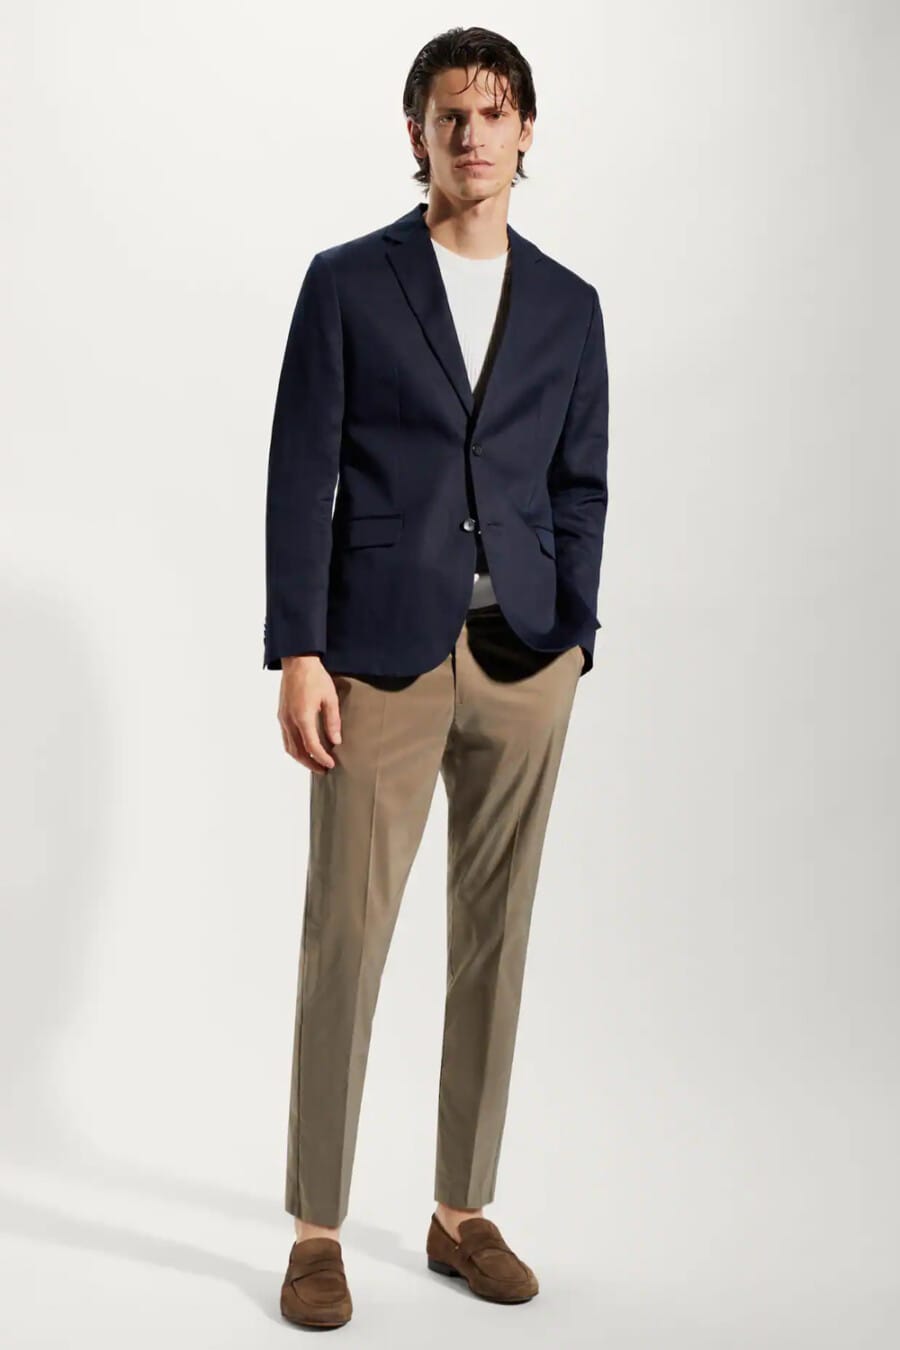 Men's Navy single-breasted blazer, cropped light brown pants, white T-shirt and brown suede penny loafers outfit